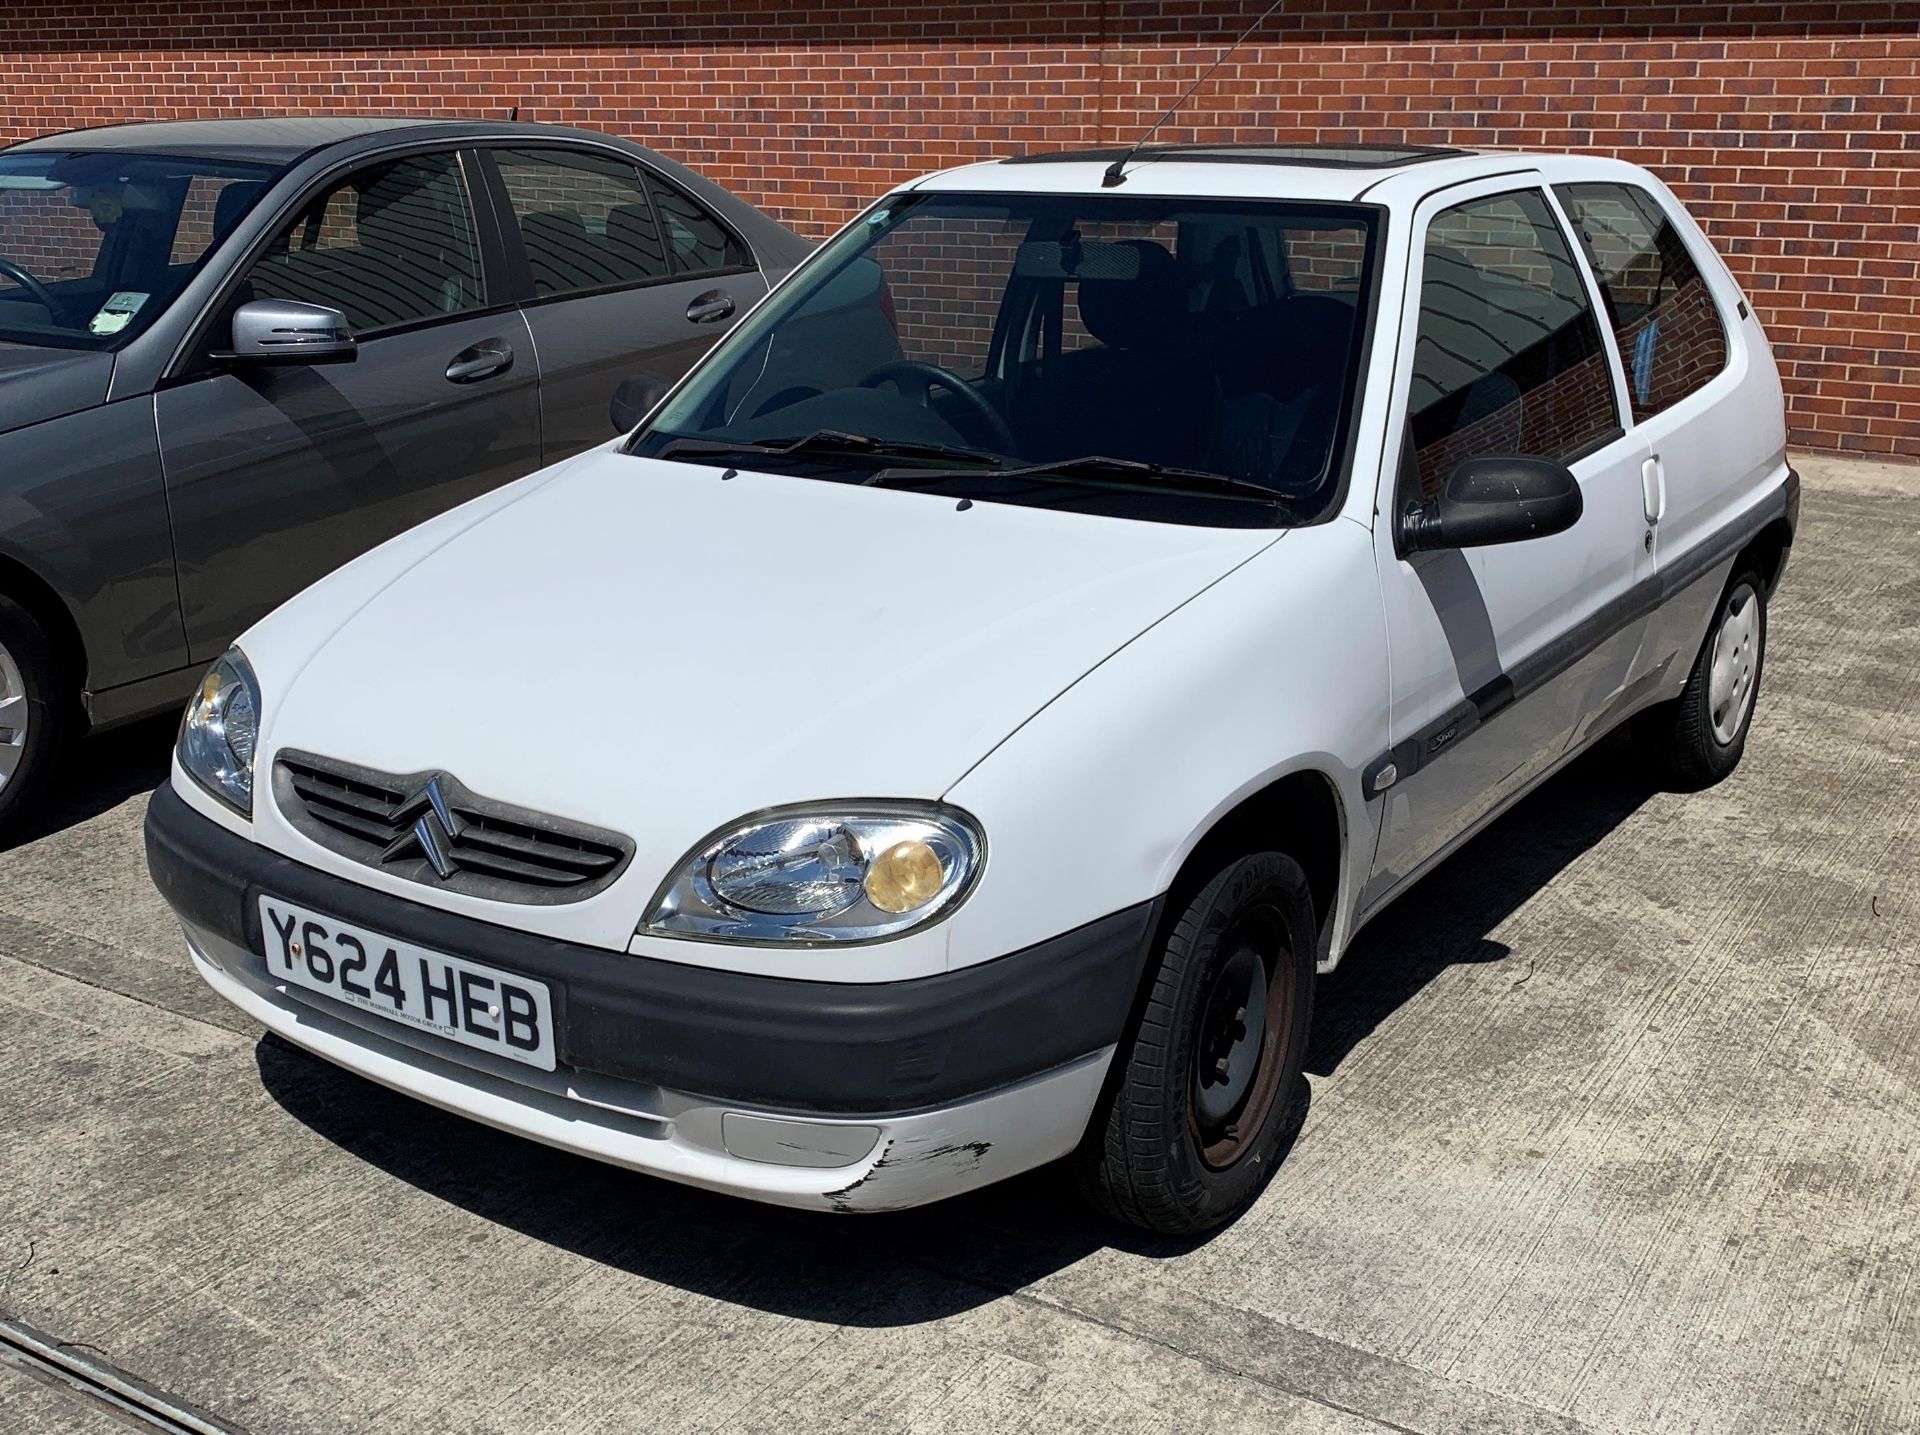 CITROEN SAXO FORTE 1.1 THREE DOOR HATCHBACK - Petrol - White. FROM A DECEASED ESTATE. - Image 15 of 15